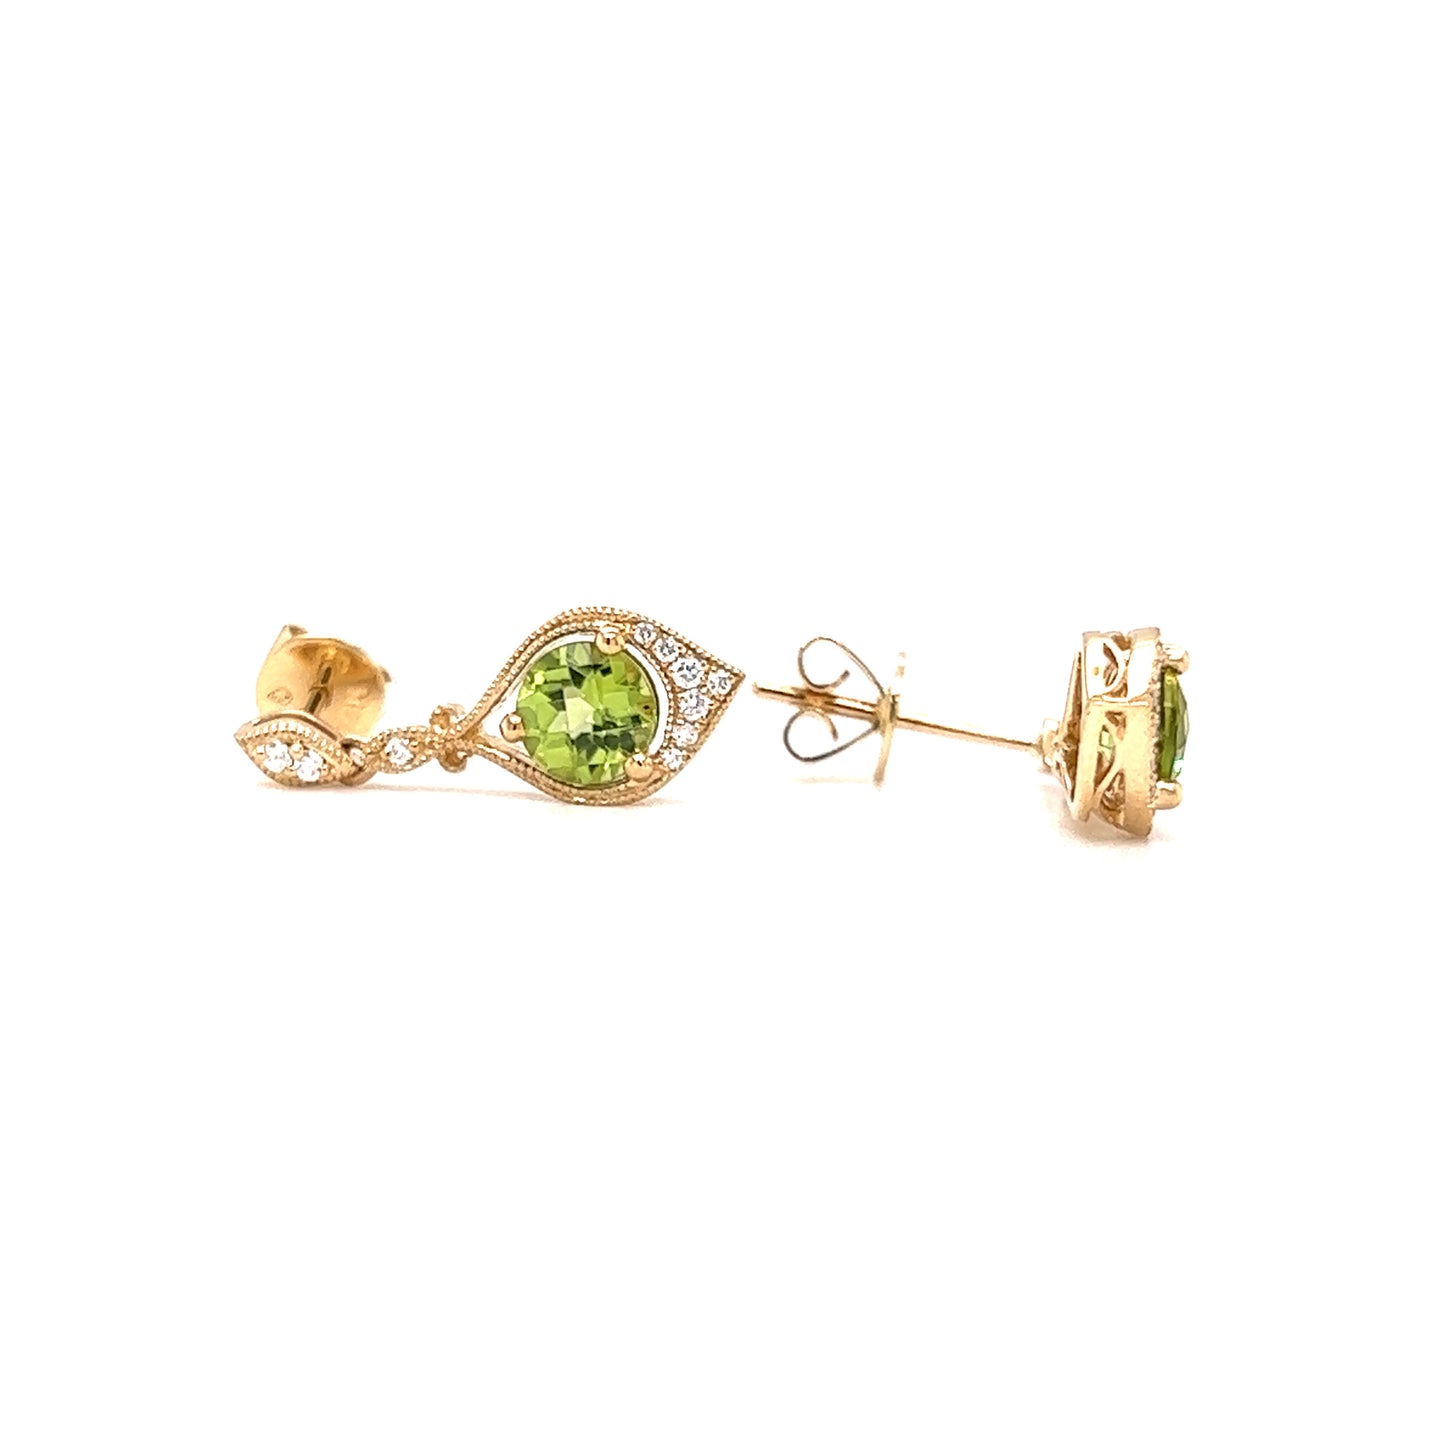 Round Peridot Drop Earrings with Twenty Diamonds in 14K Yellow Gold Front and Side View